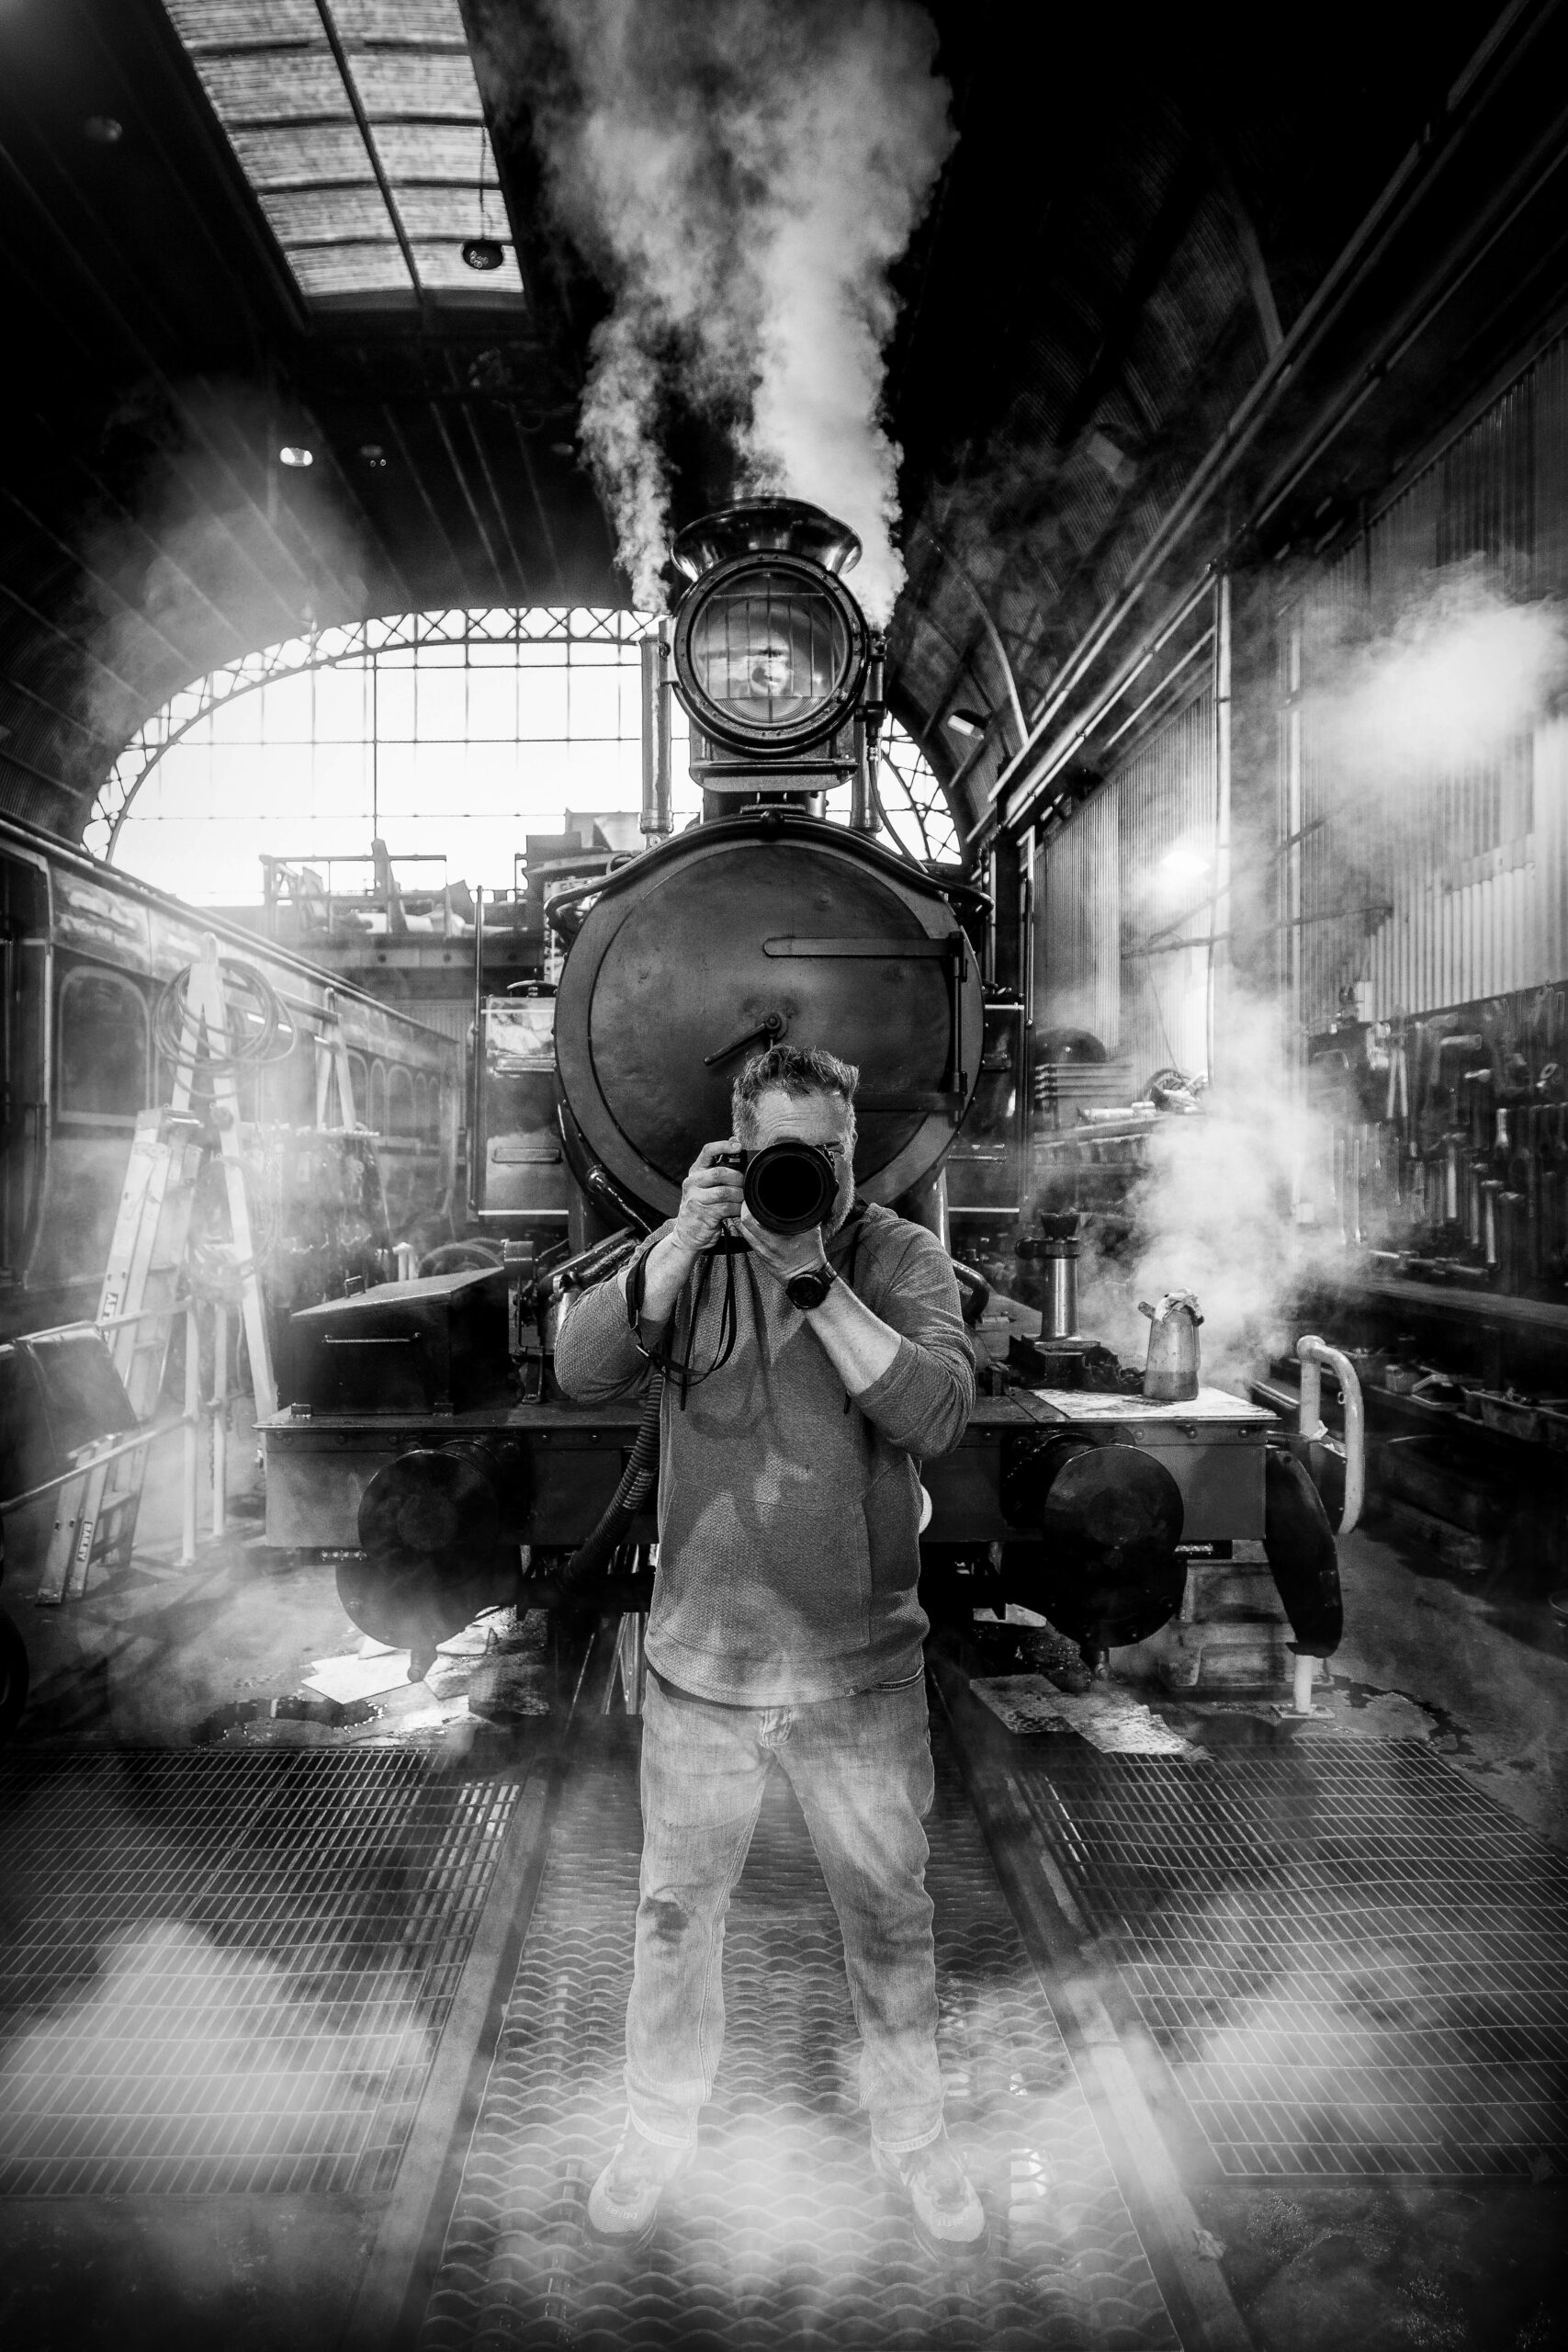 A photographer stands directly in front of a steam locomotive holding a camera in front of his face, facing the direction of the person taking his image.